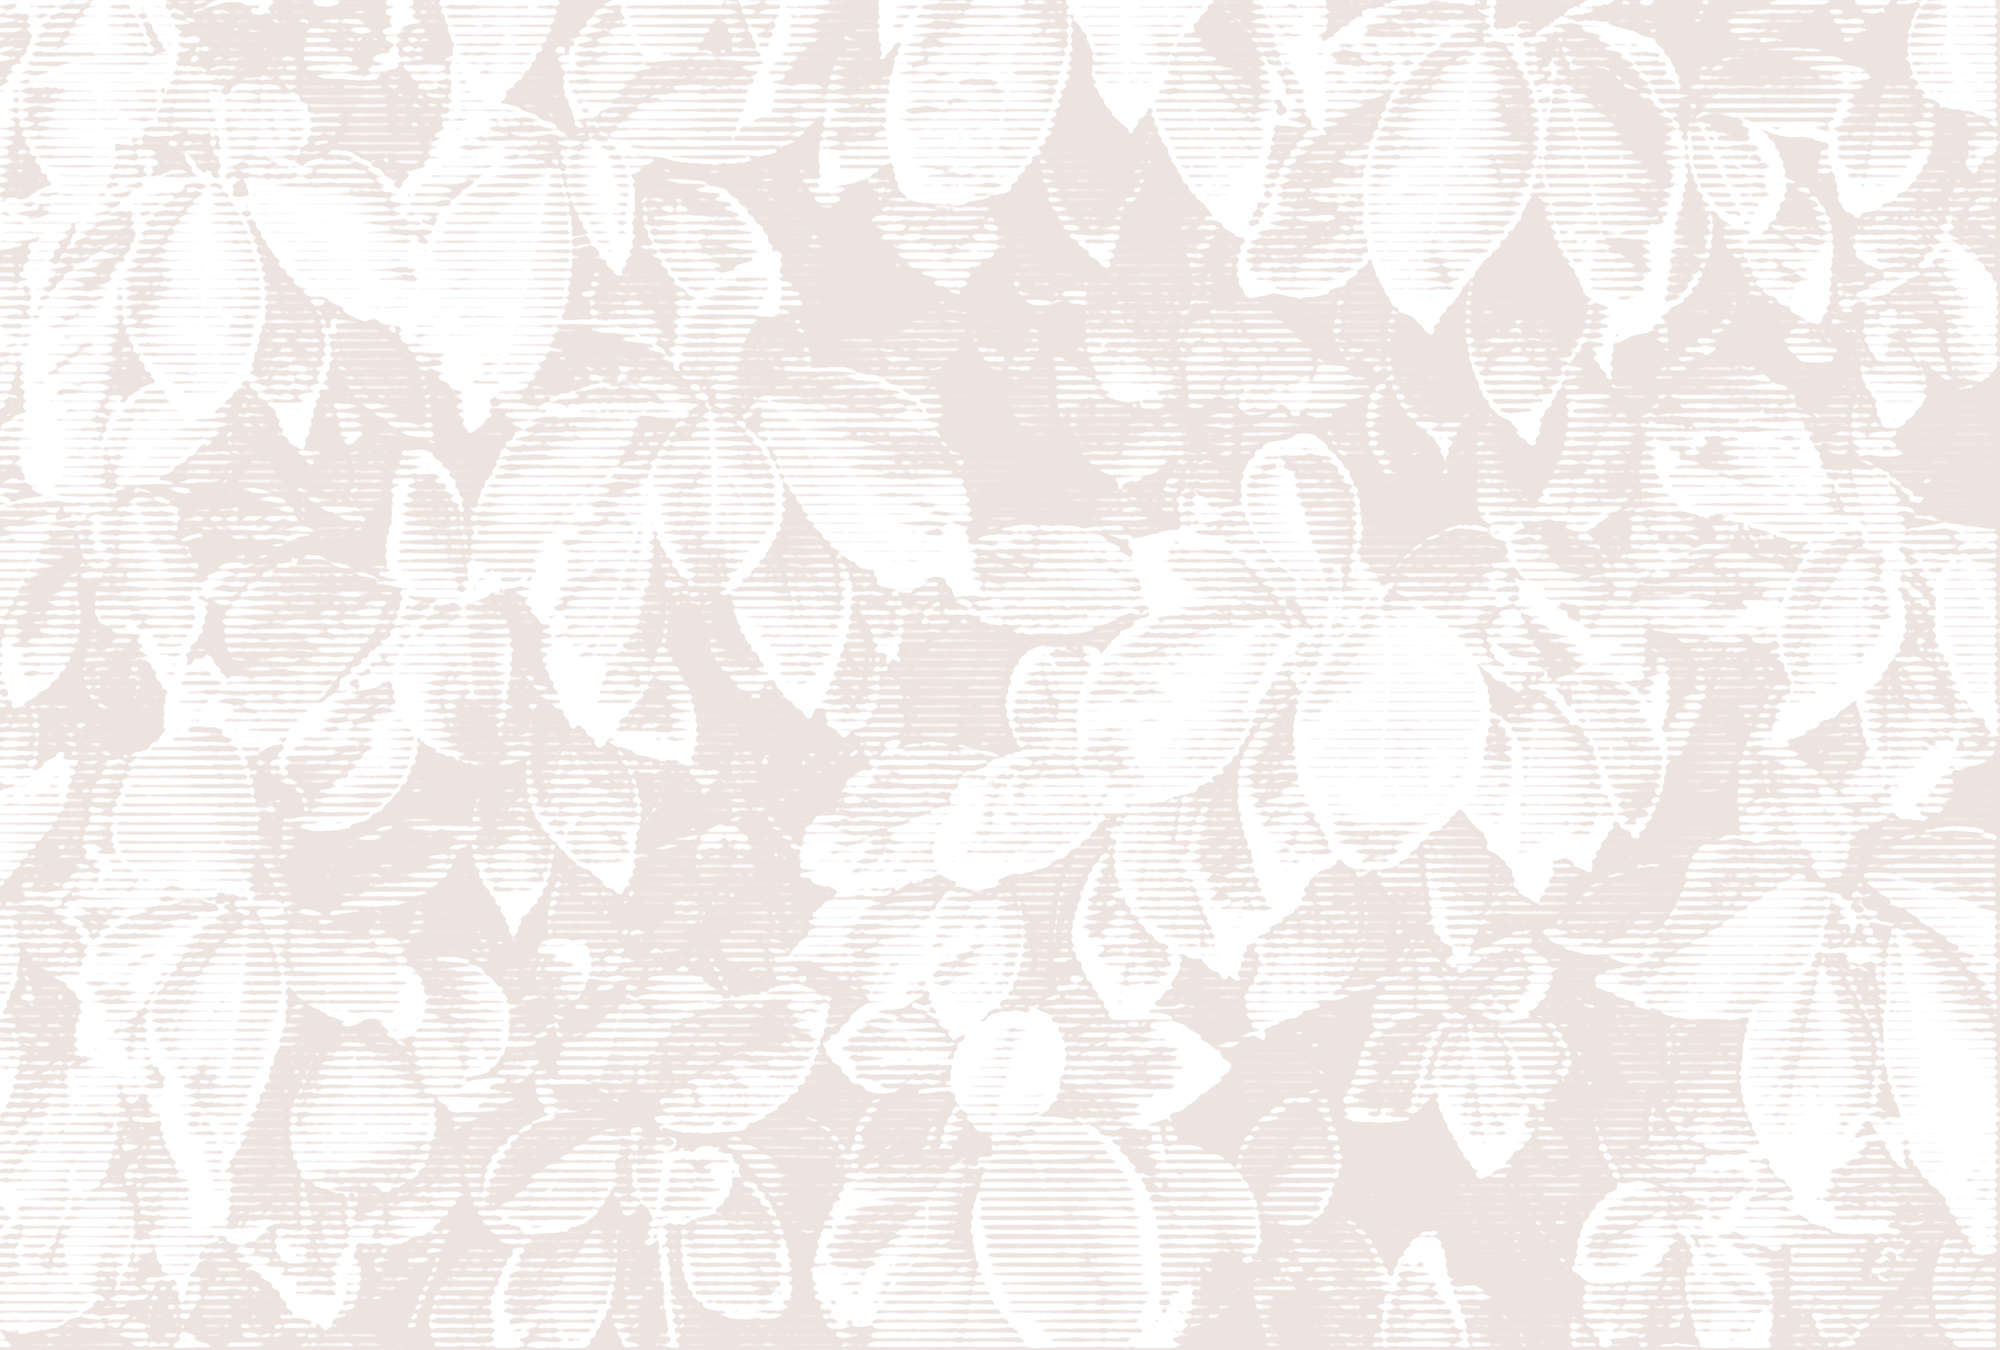             Photo wallpaper leaves optics in shabby chic look - pink, white
        